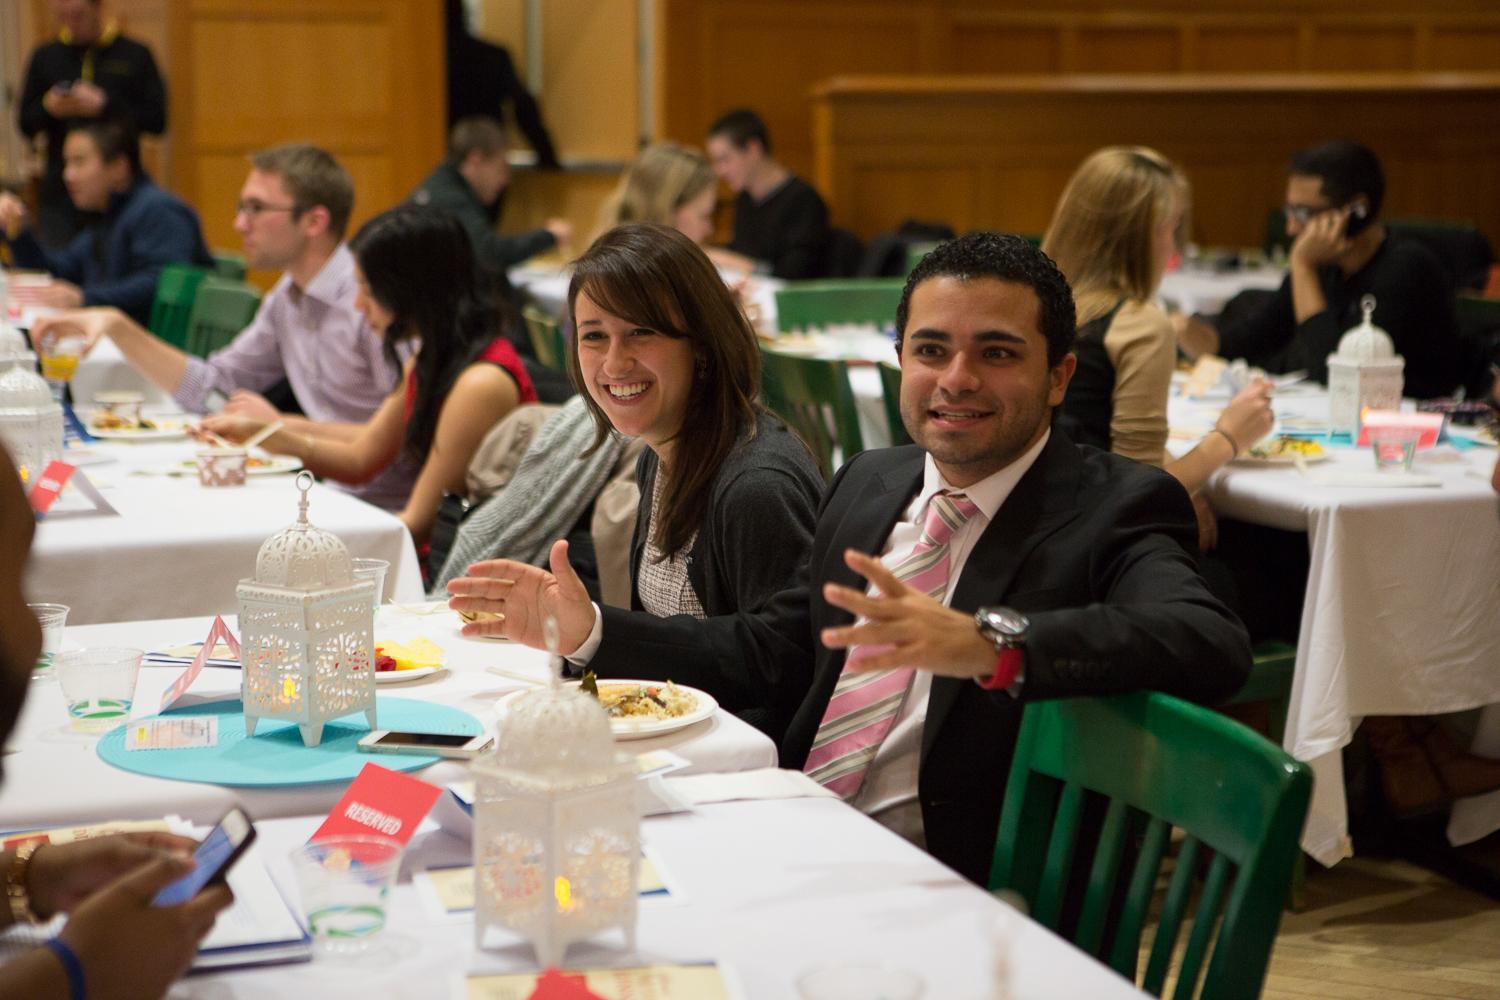 Student organizations representing the university's diverse religious community gathered for the Interfaith Dinner.